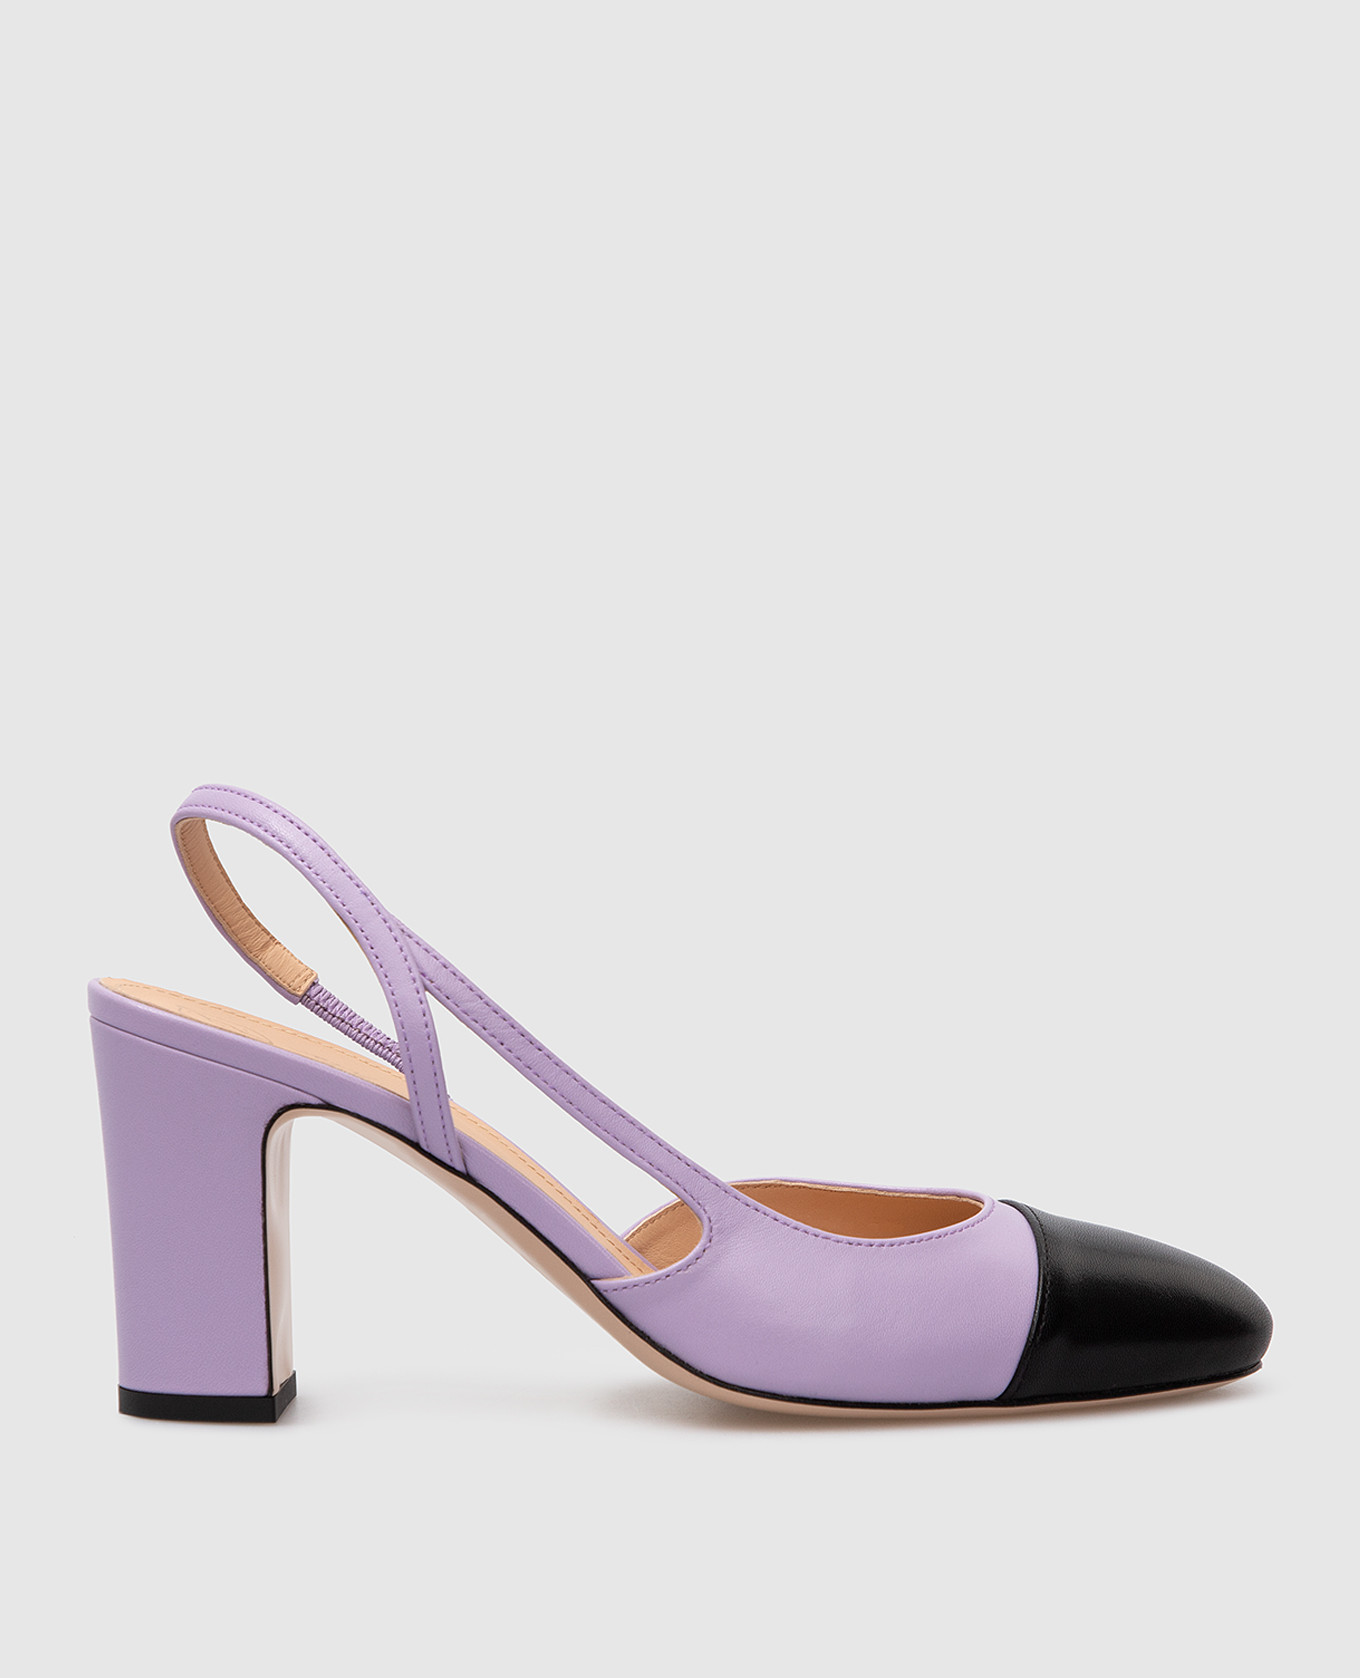 Babe Pay Pls - Lilac leather slingbacks with contrast panel ...